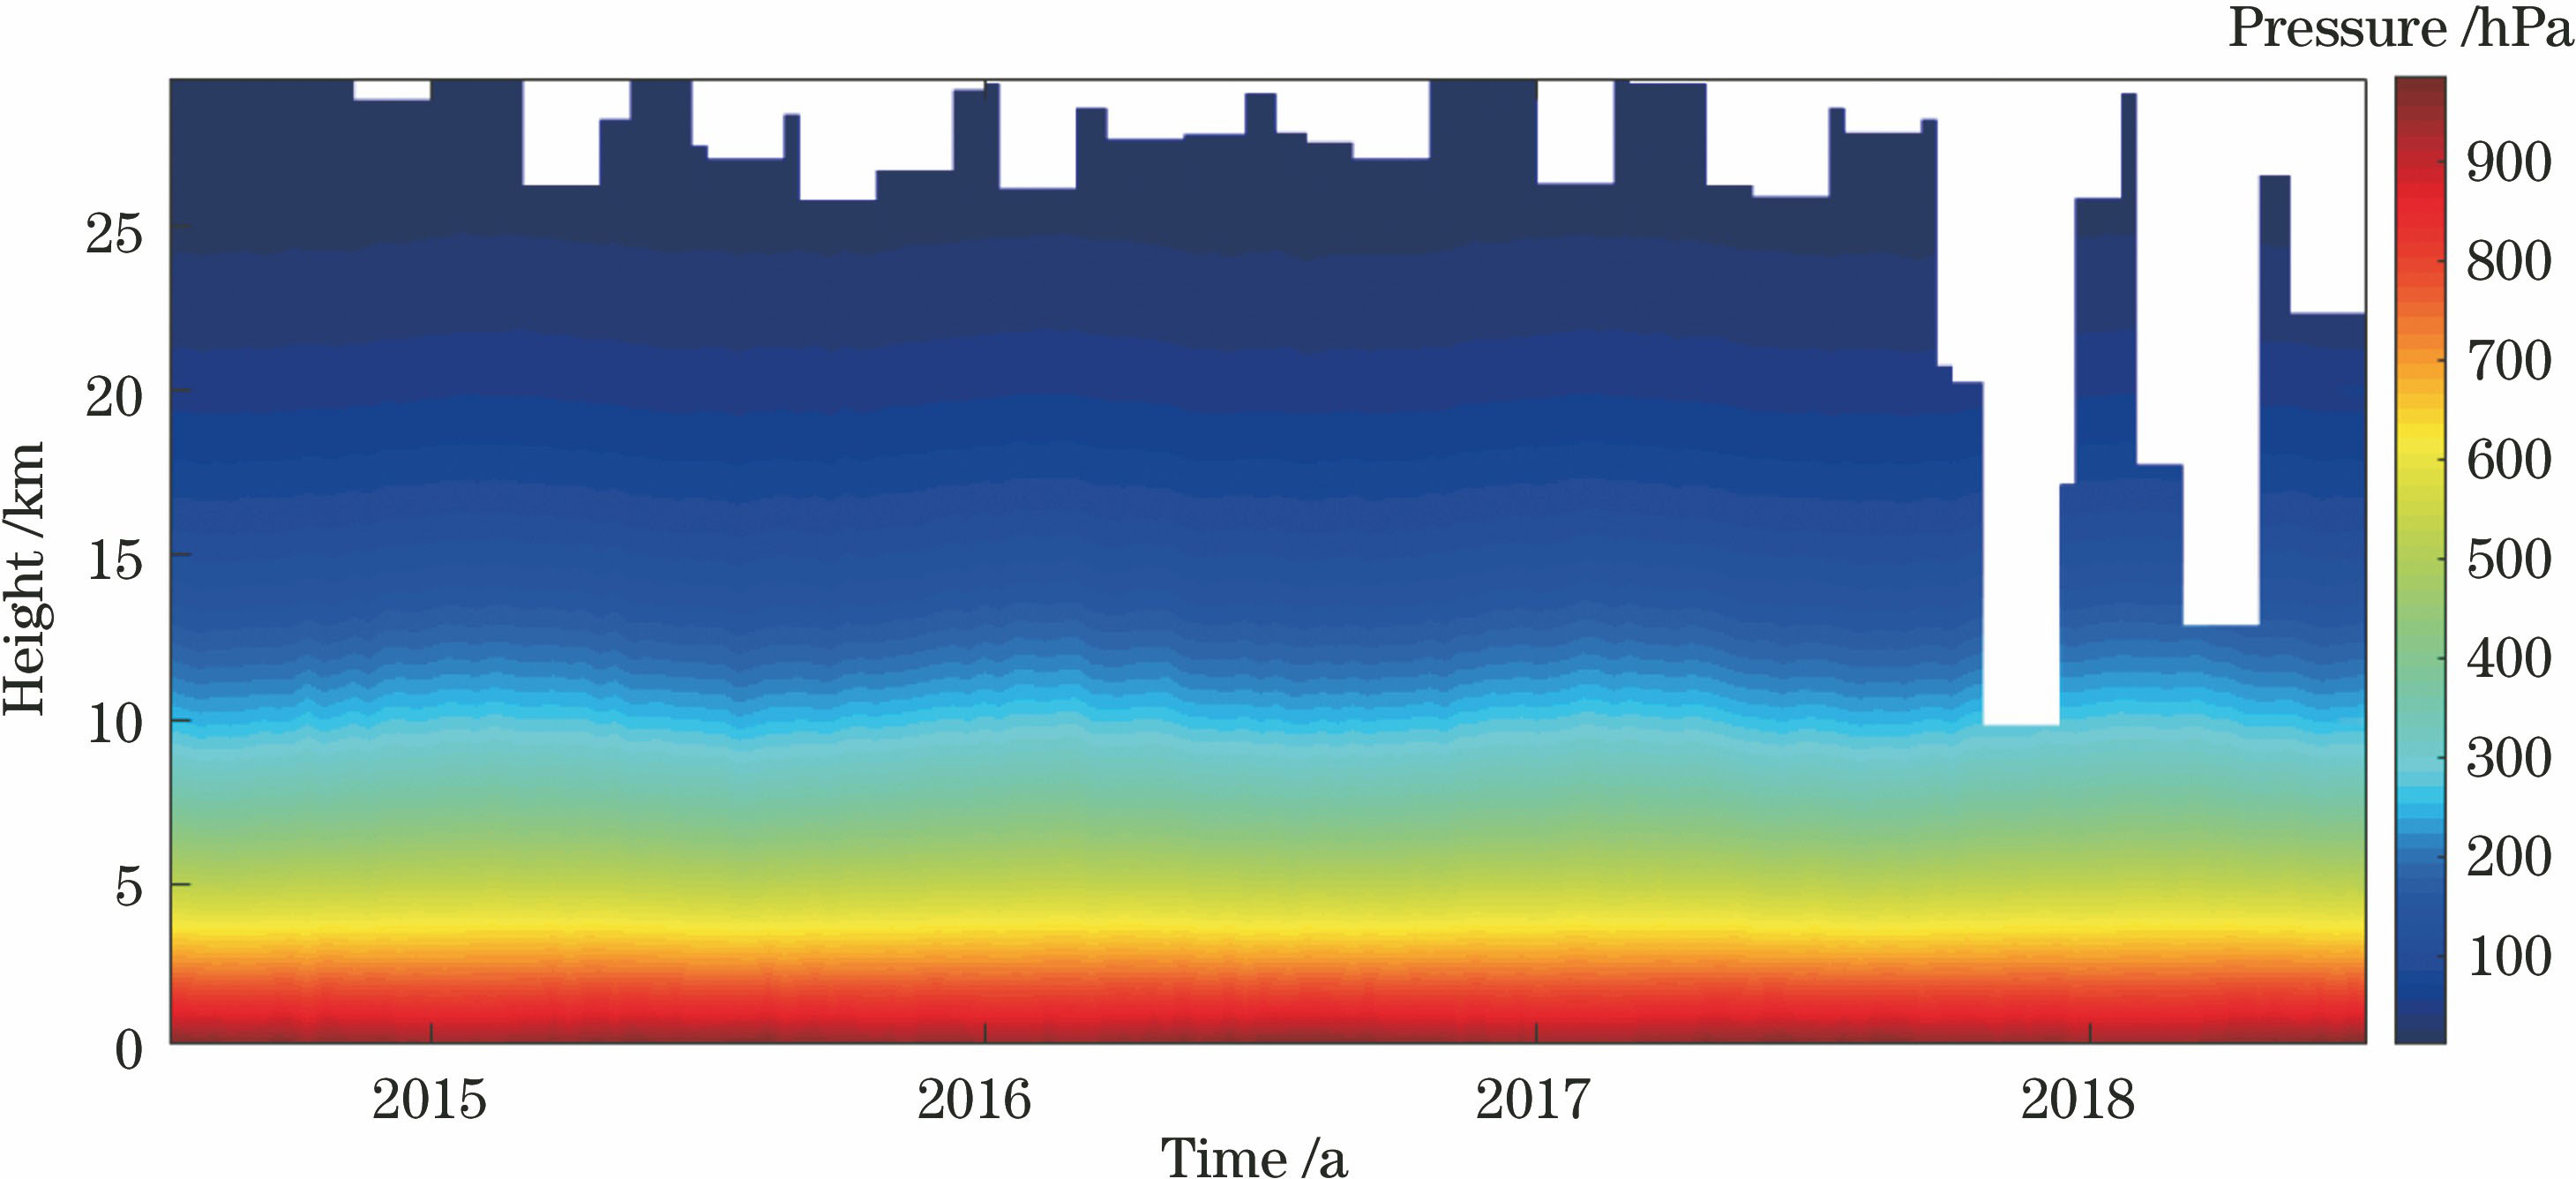 Atmospheric pressure over Xian from 2015 to 2018